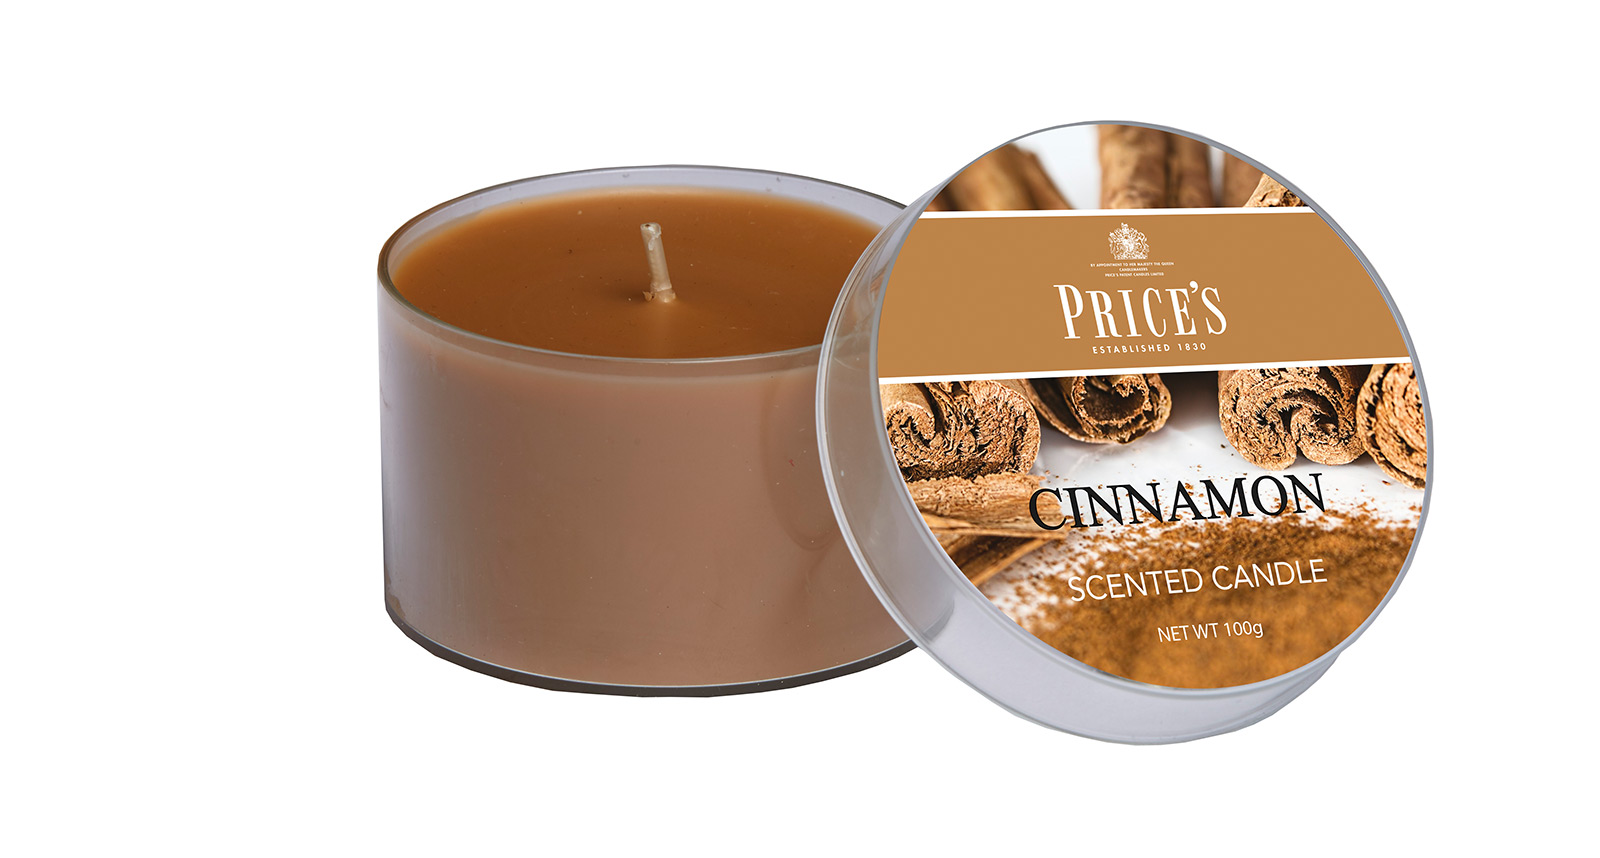 Prices Candle "Cinnamon" 100g     